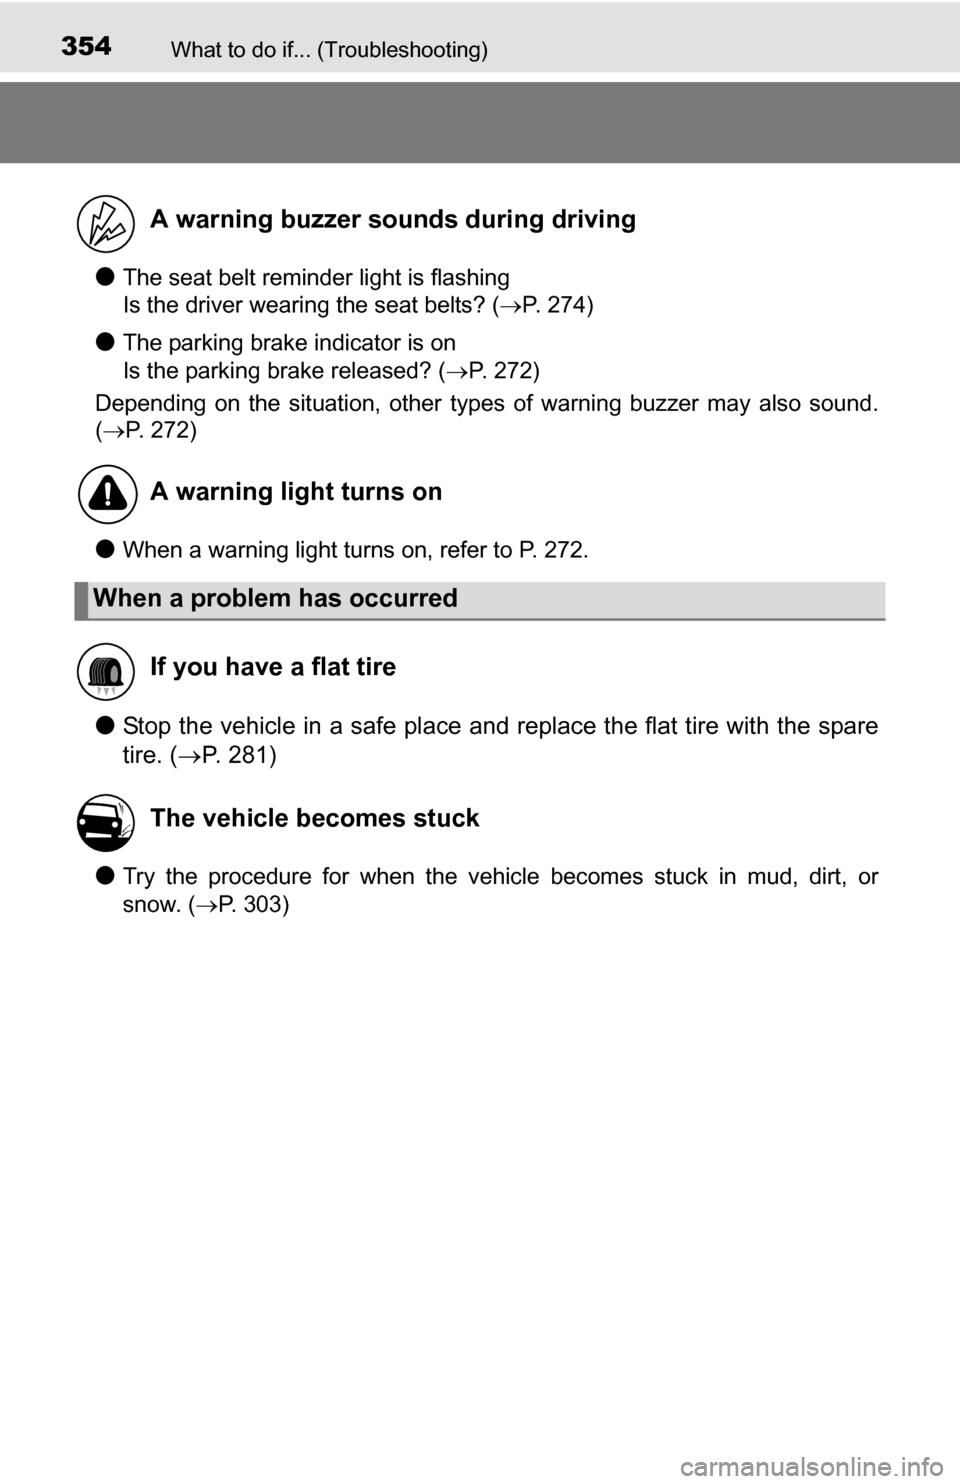 TOYOTA YARIS 2016 3.G Service Manual 354What to do if... (Troubleshooting)
●The seat belt reminder light is flashing 
Is the driver wearing the seat belts? (P. 274)
●The parking brake indicator is on 
Is the parking brake released